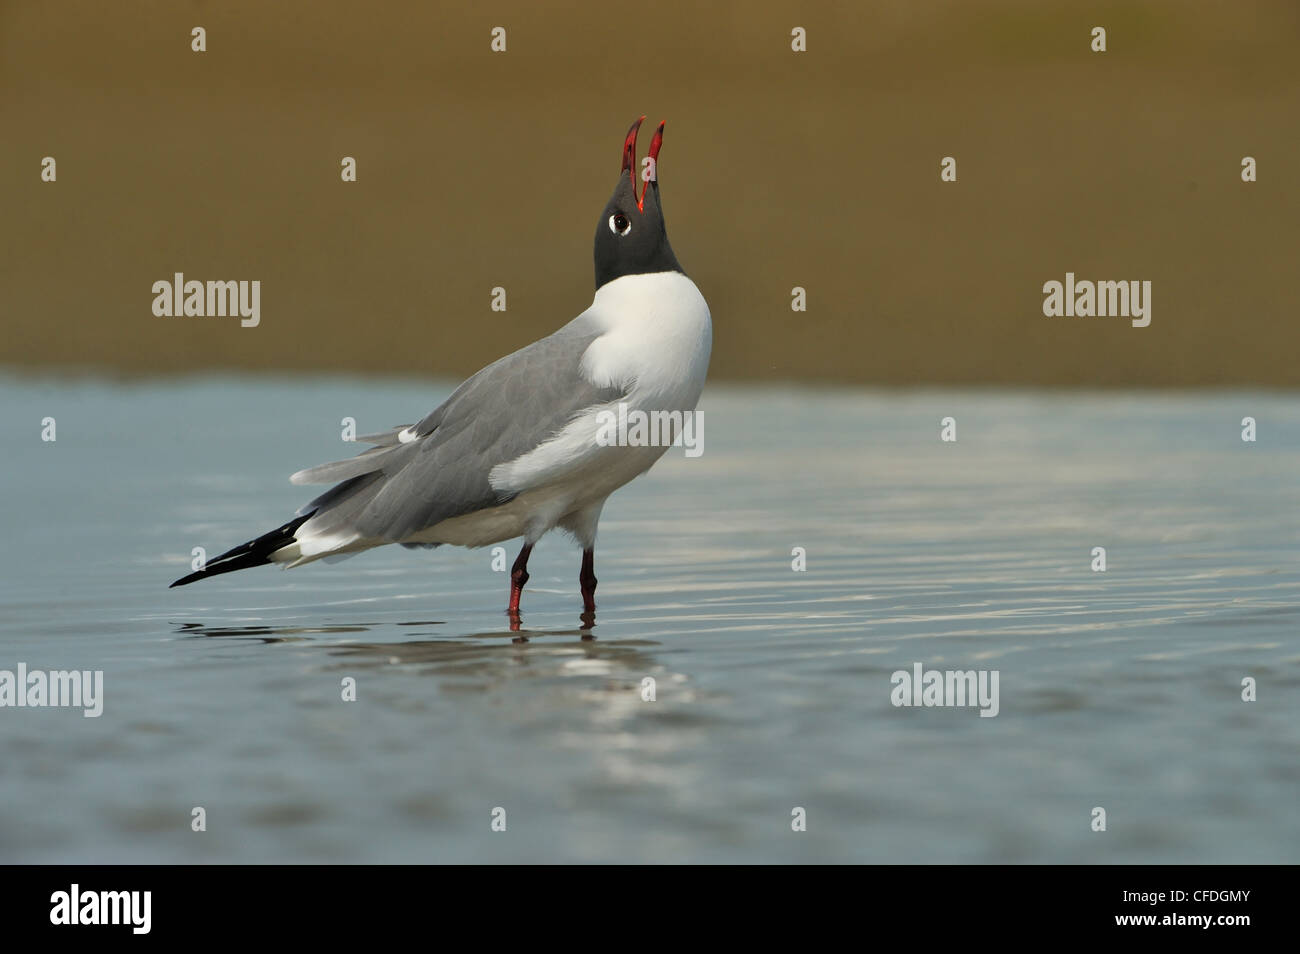 Laughing Gull (Larus atricilla) - South Padre Island, Texas, United States of America Stock Photo